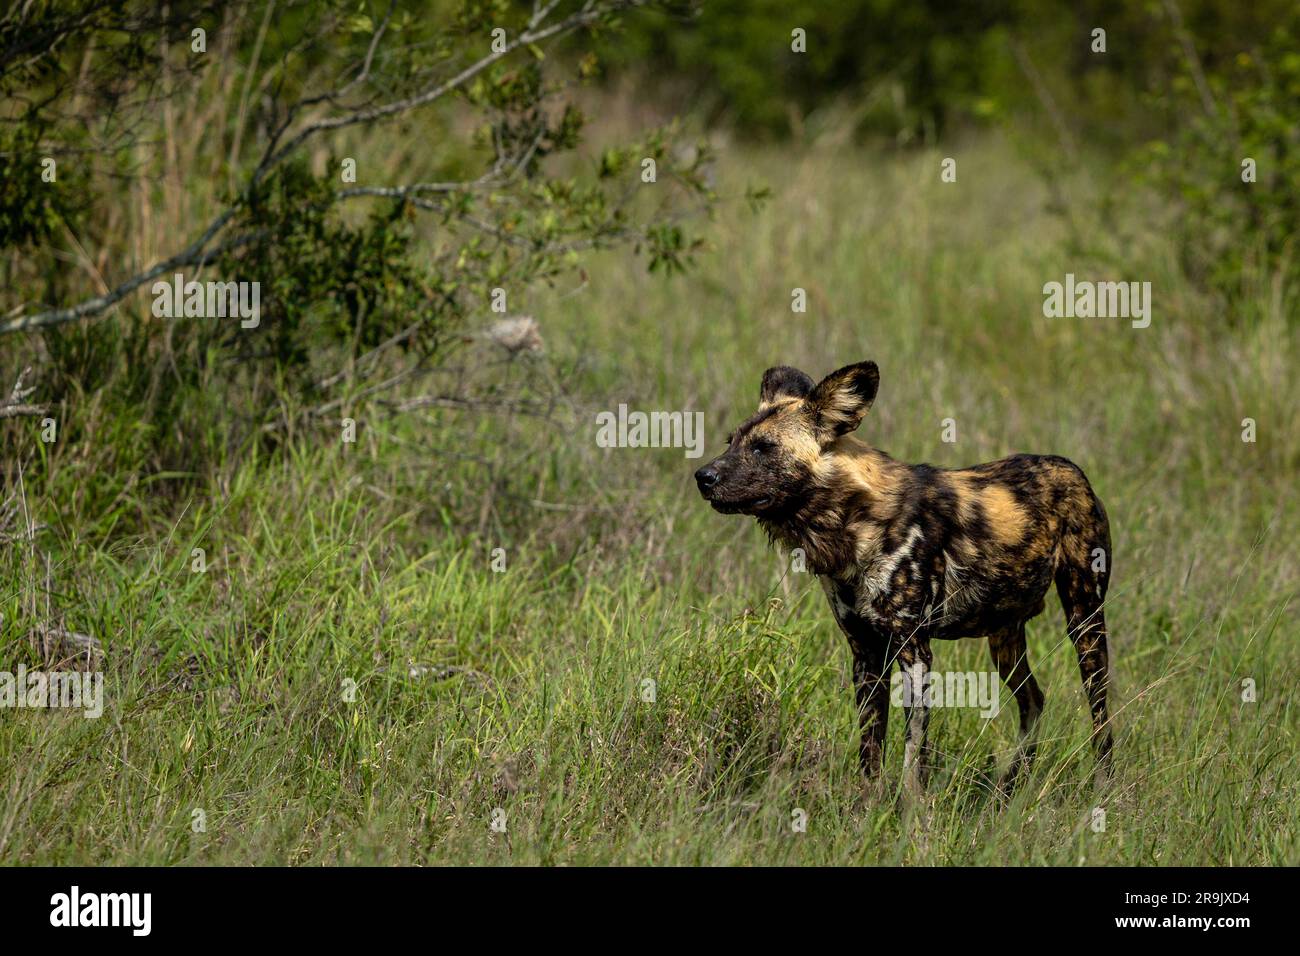 A wild dog, Lycaon pictus, standing in the grass. Stock Photo